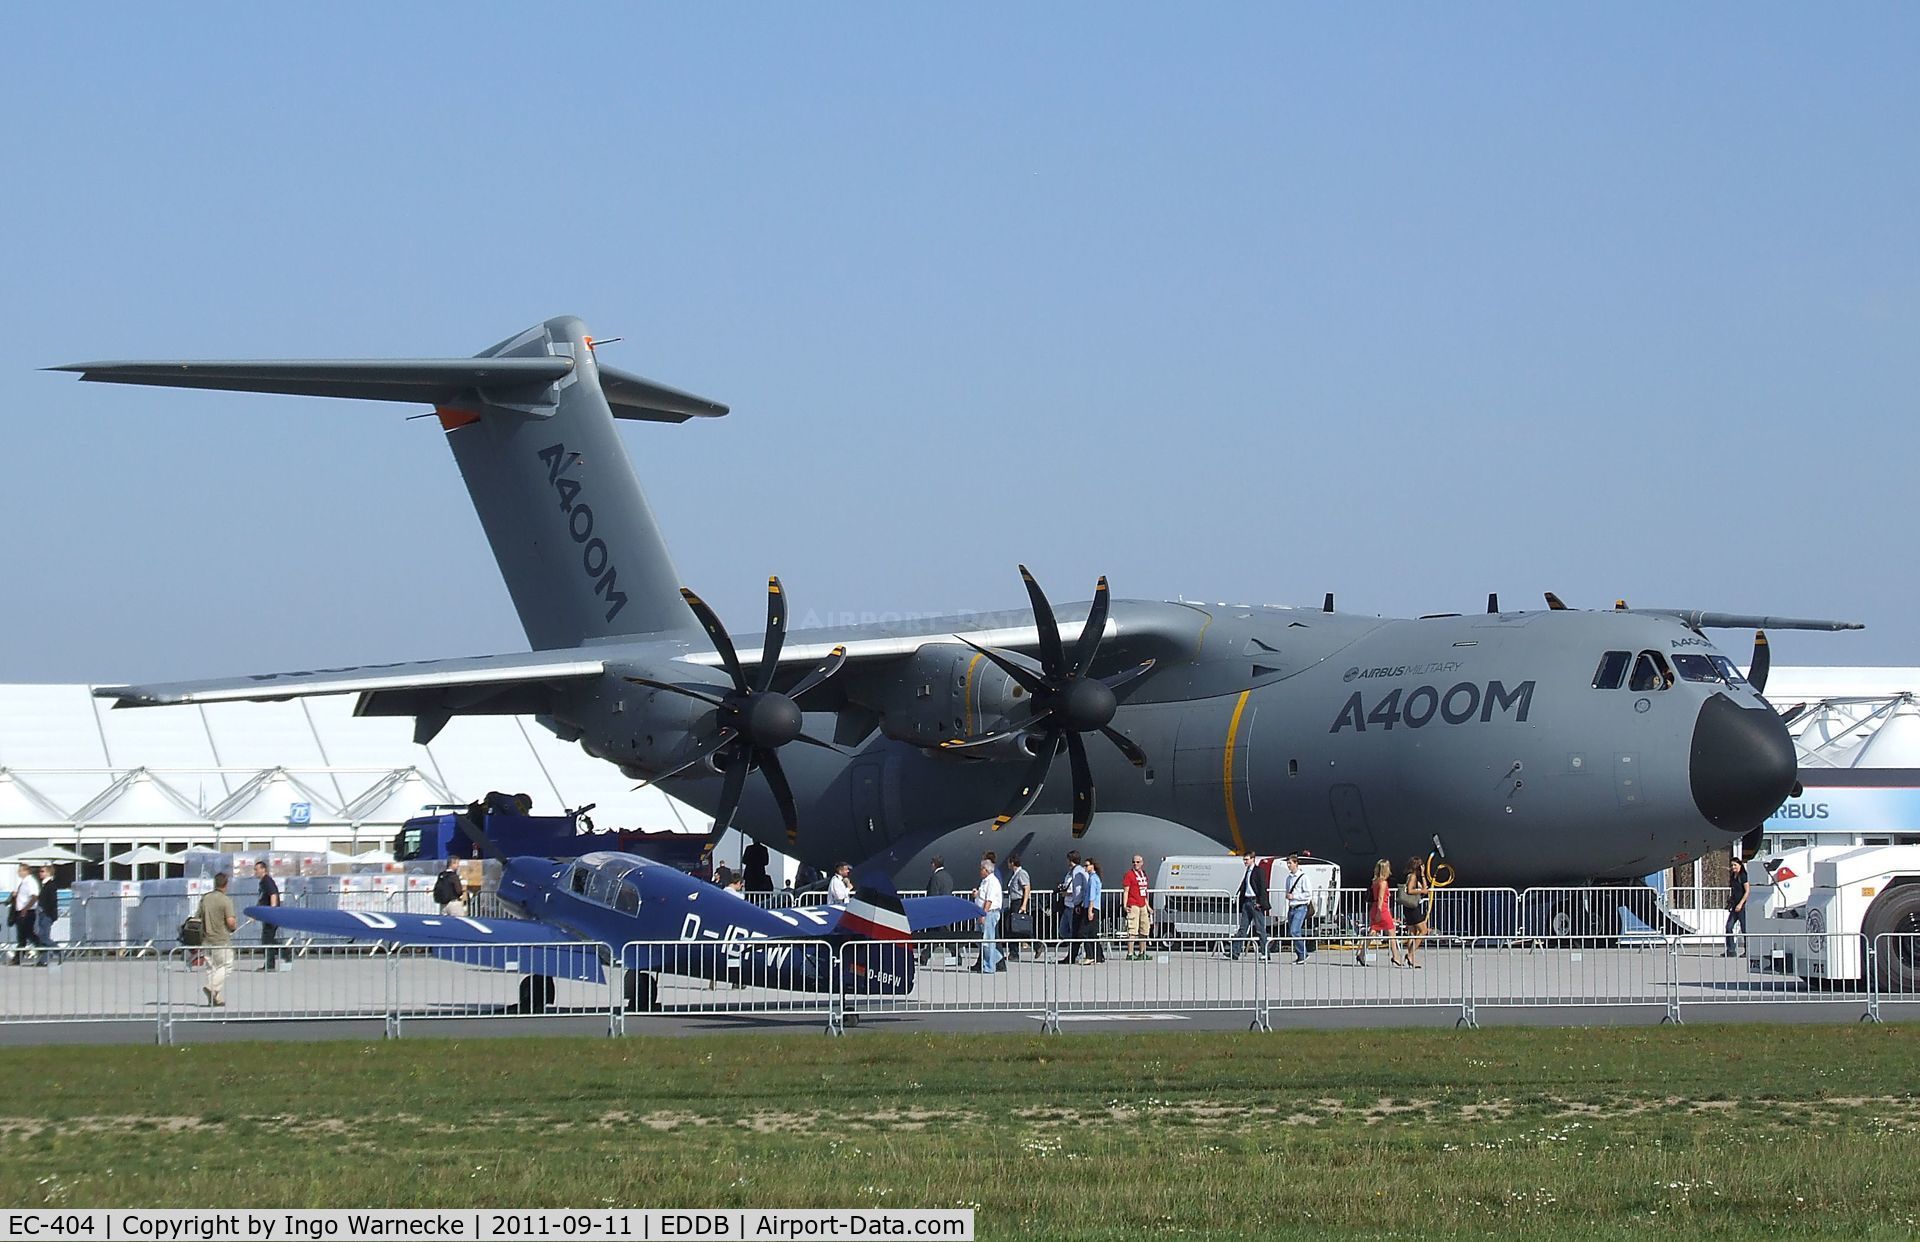 EC-404, 2010 Airbus A400M Atlas C/N 004, Airbus A400M Grizzly at the ILA 2012, Berlin